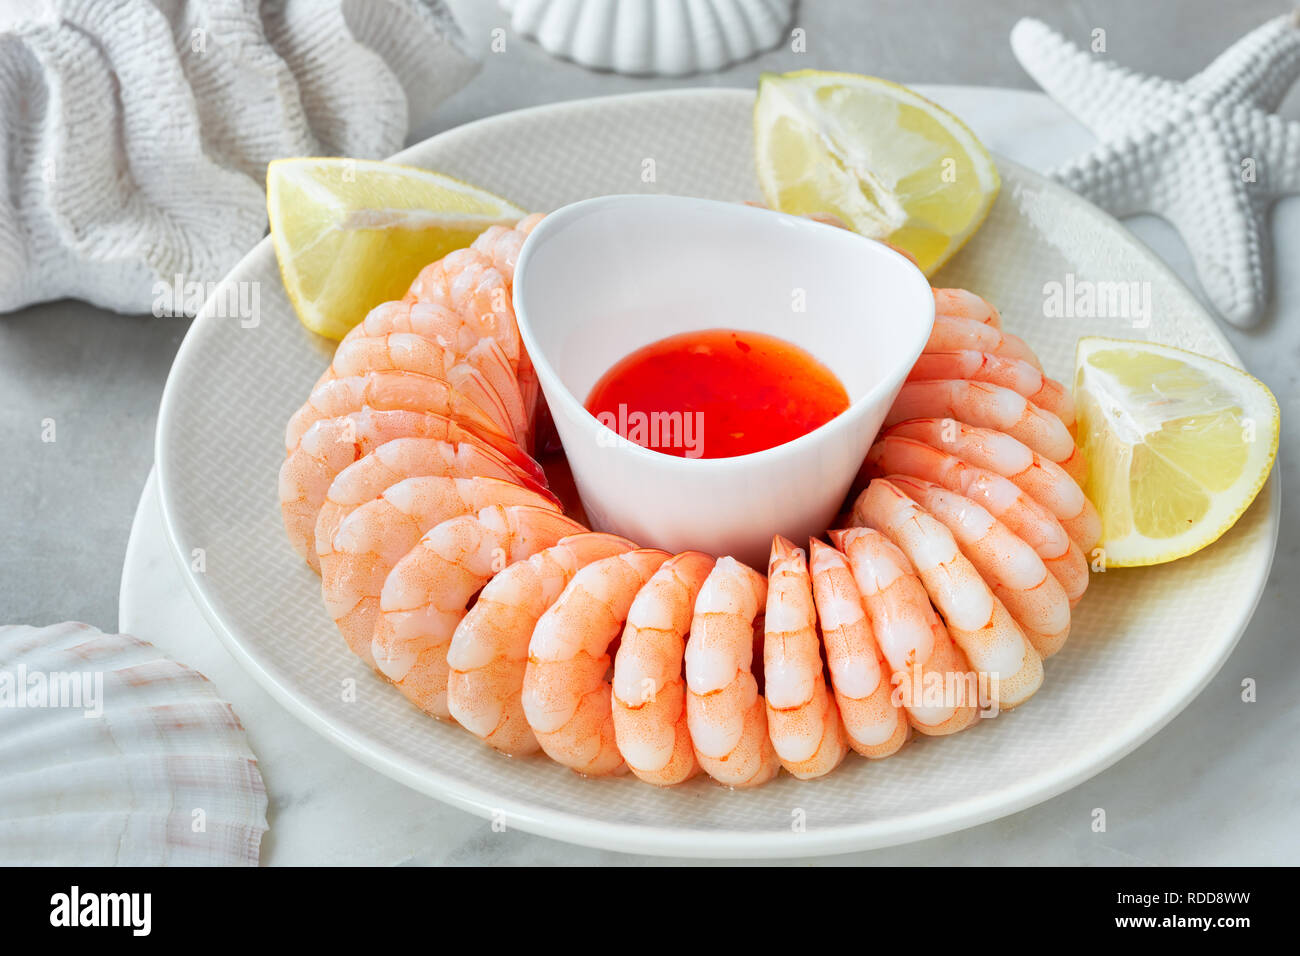 Close-up on shrimp ring with sweet chili sause, dill and  lemon on light background with white sea decorations Stock Photo